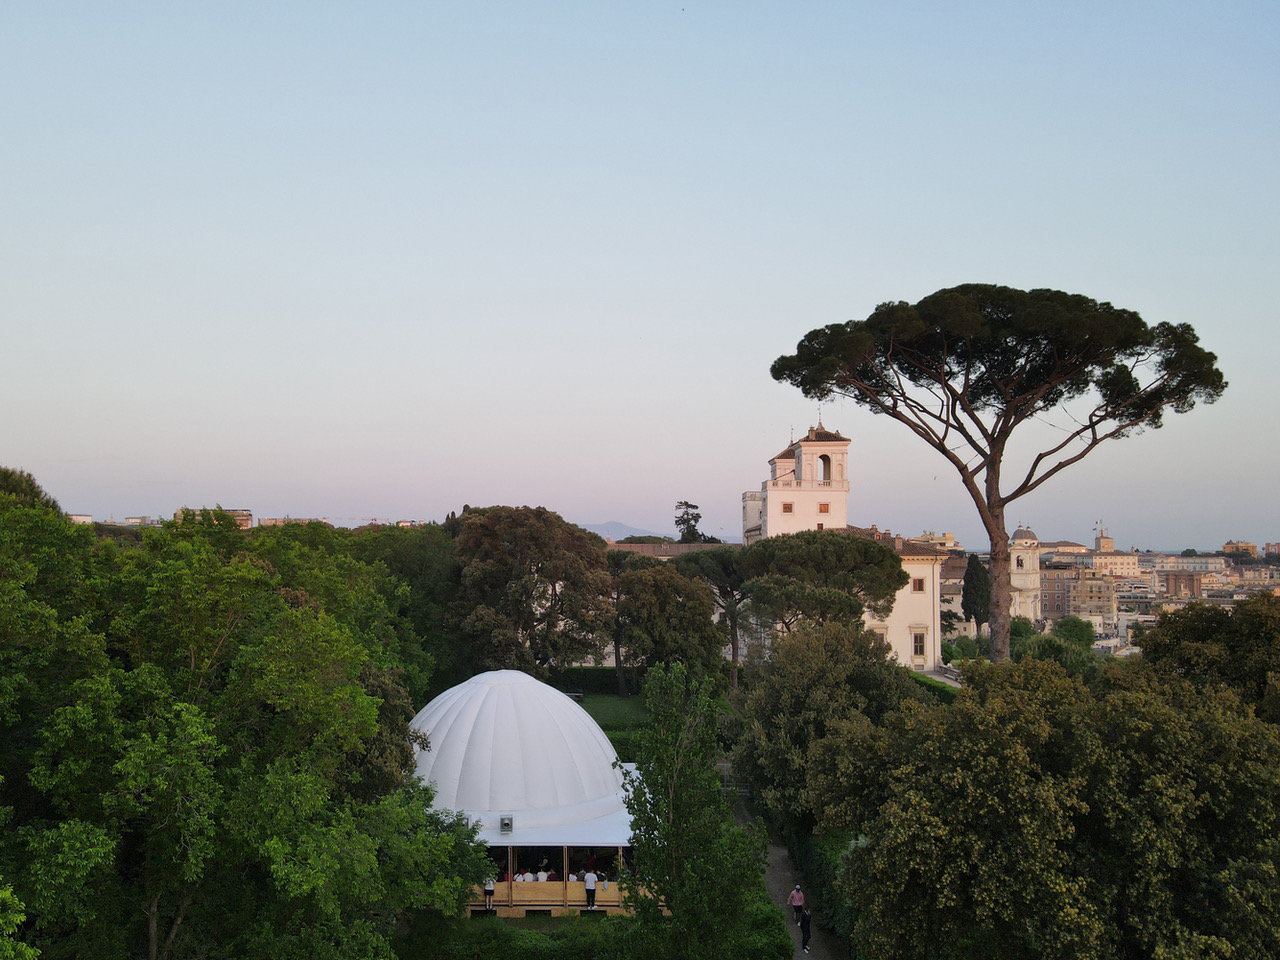 The white canopy of the inflatable ProtoCAMPO pavilion peeks through the trees in Rome